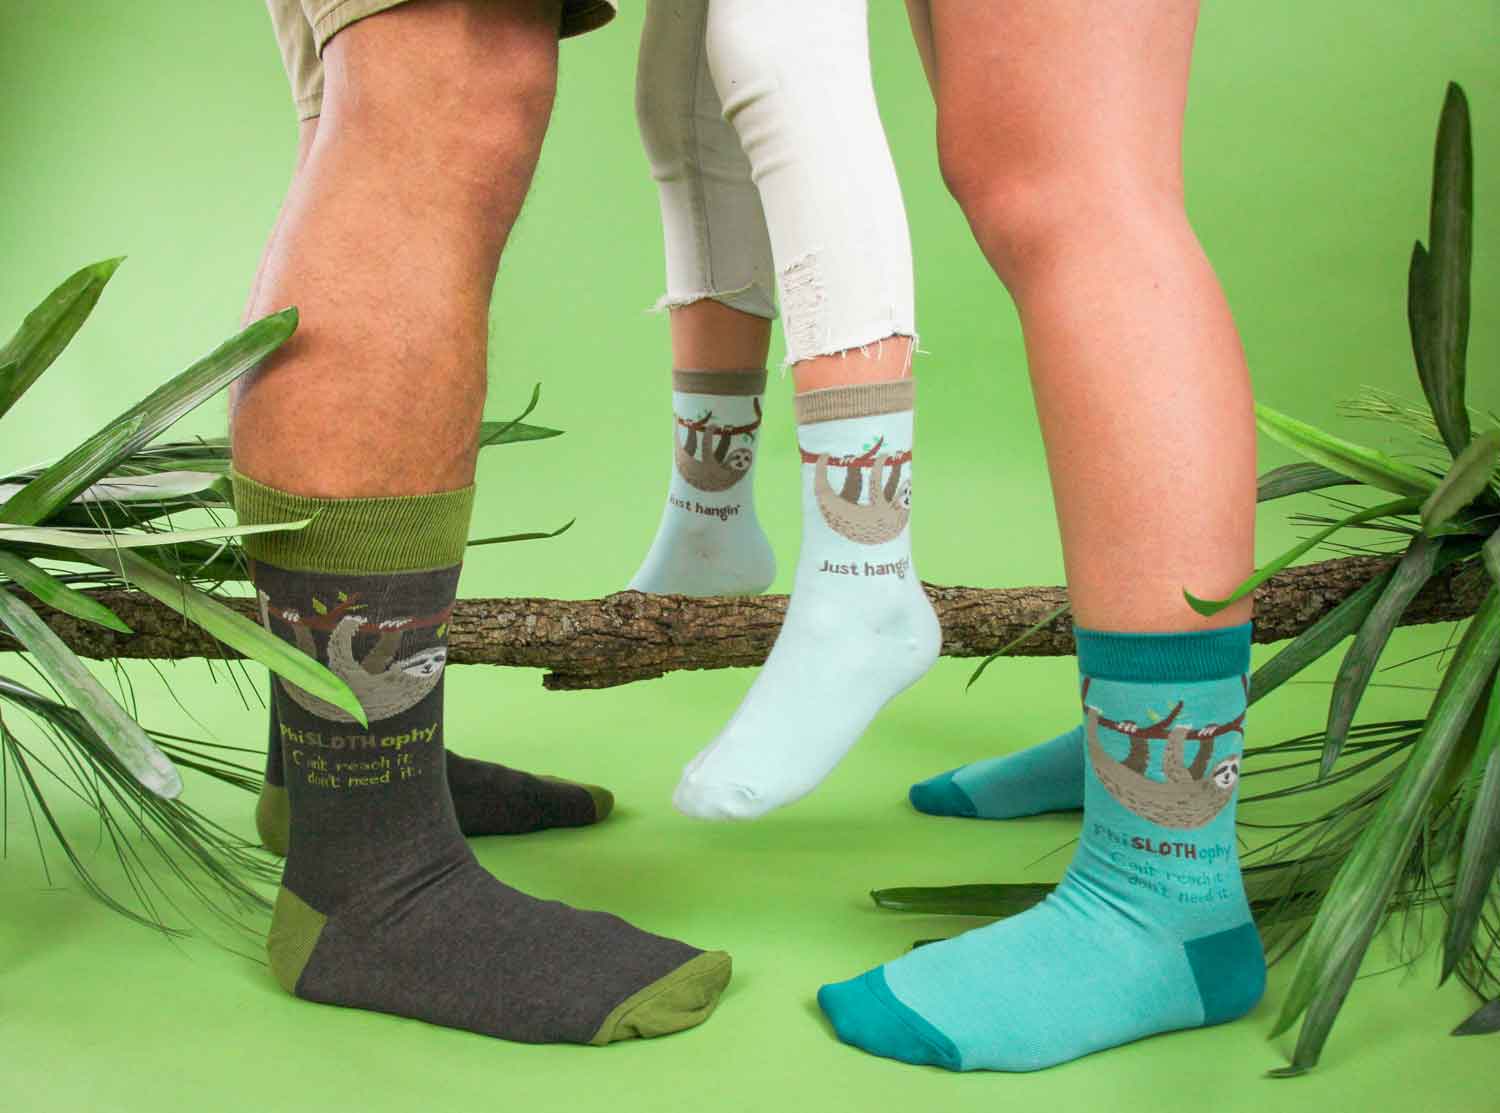 A man and woman holding up a kid in between them, all wearing Sloth design socks against a green background with foliage surrounding them.